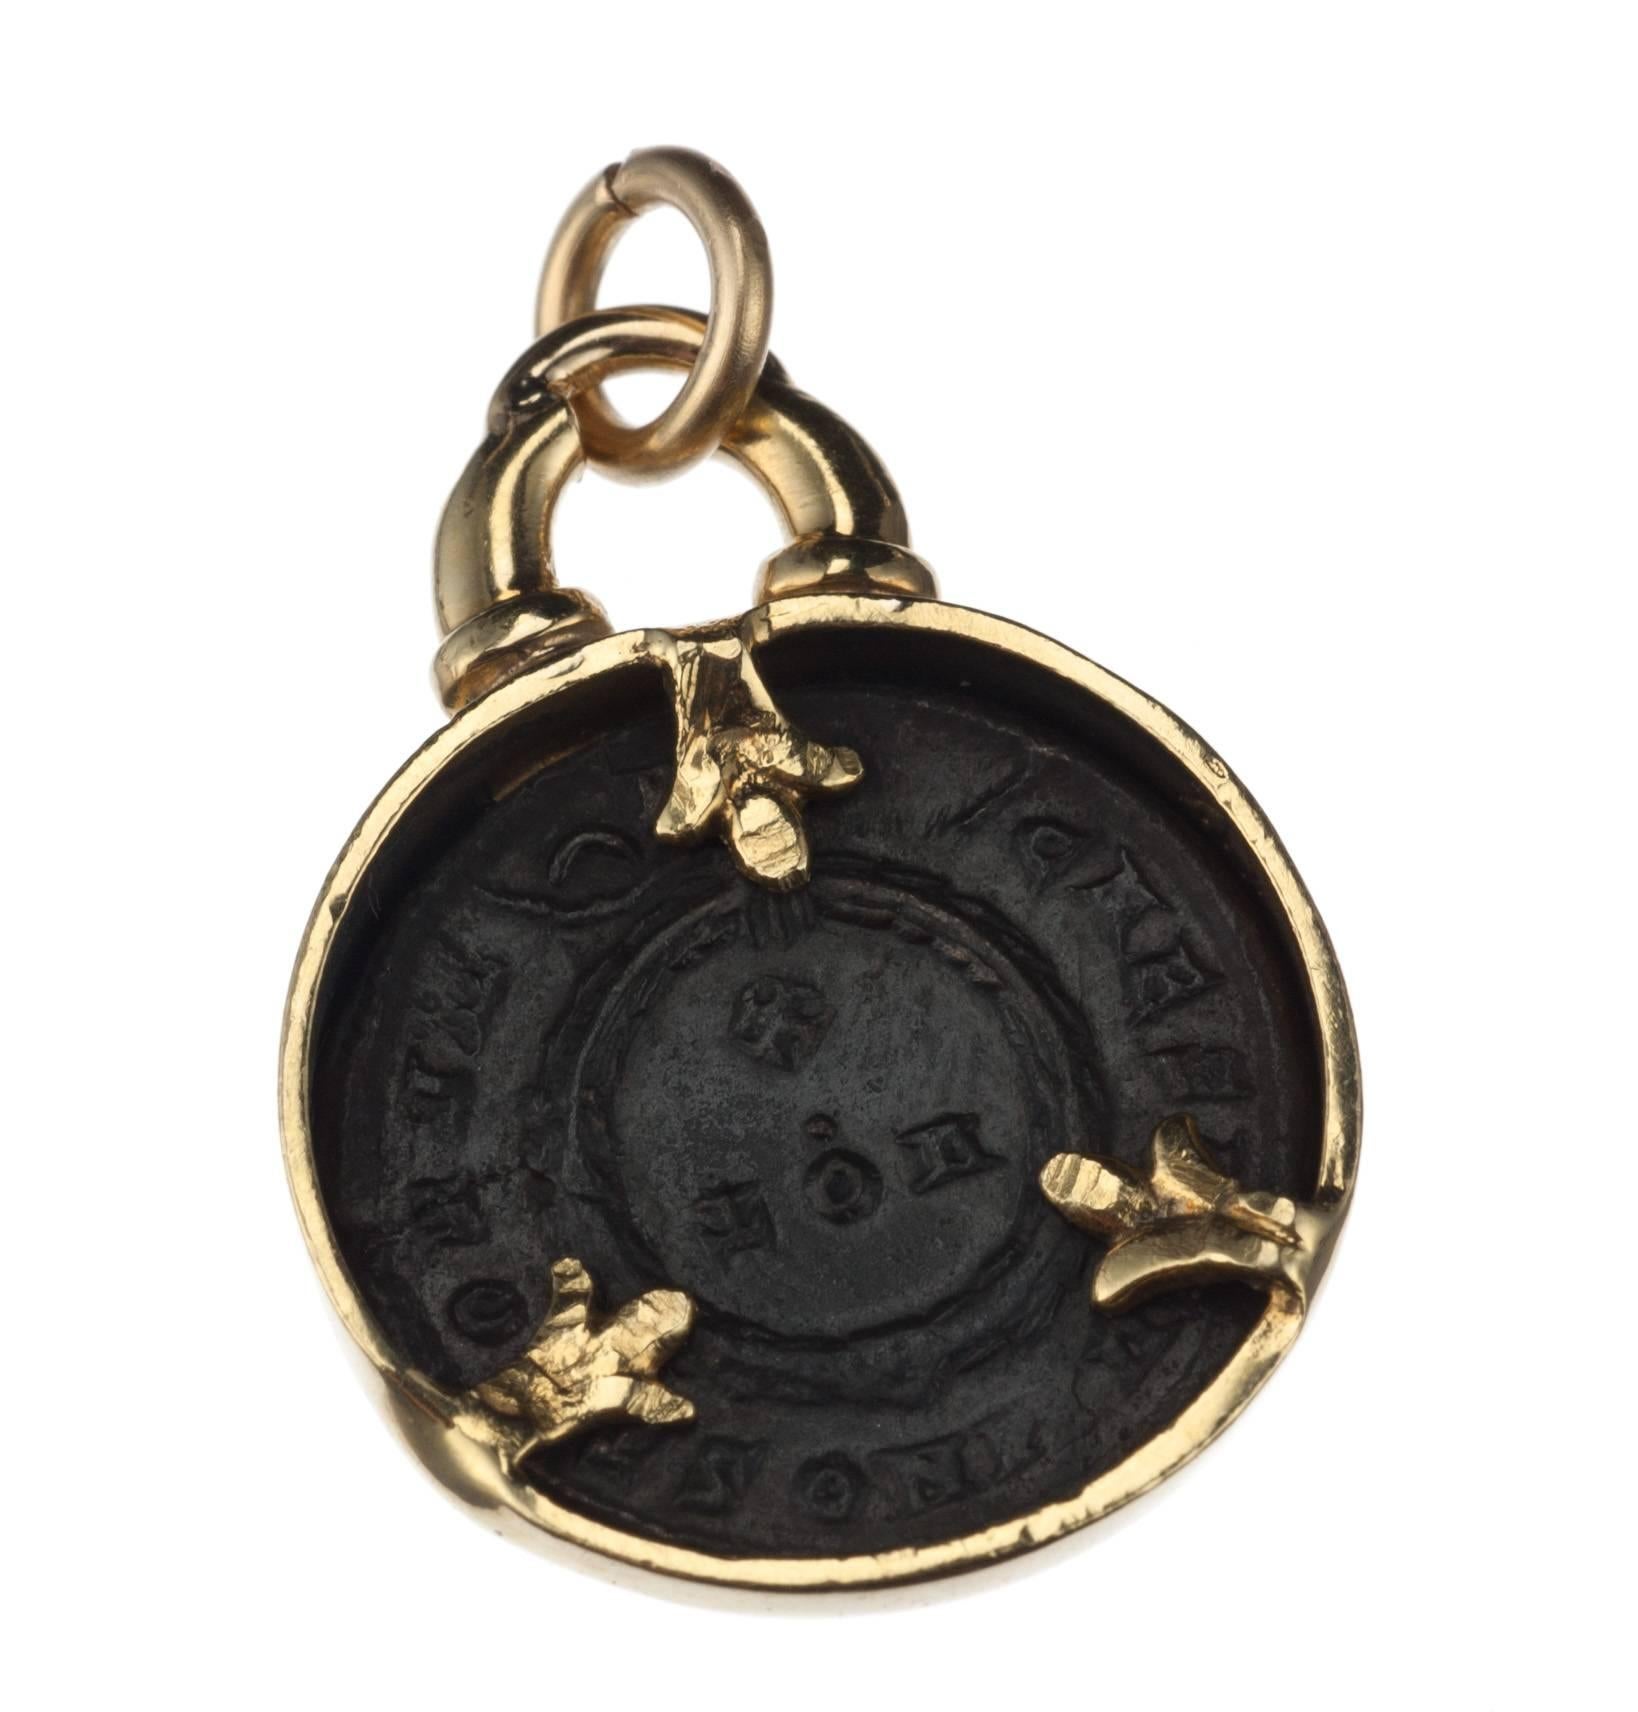 An 18-karat yellow gold charm featuring a bronze coin issued by the Roman empire that dates from the 3rd or 4th century A.D. The charm measures approx. 1.25” long and 0.75” in diameter.